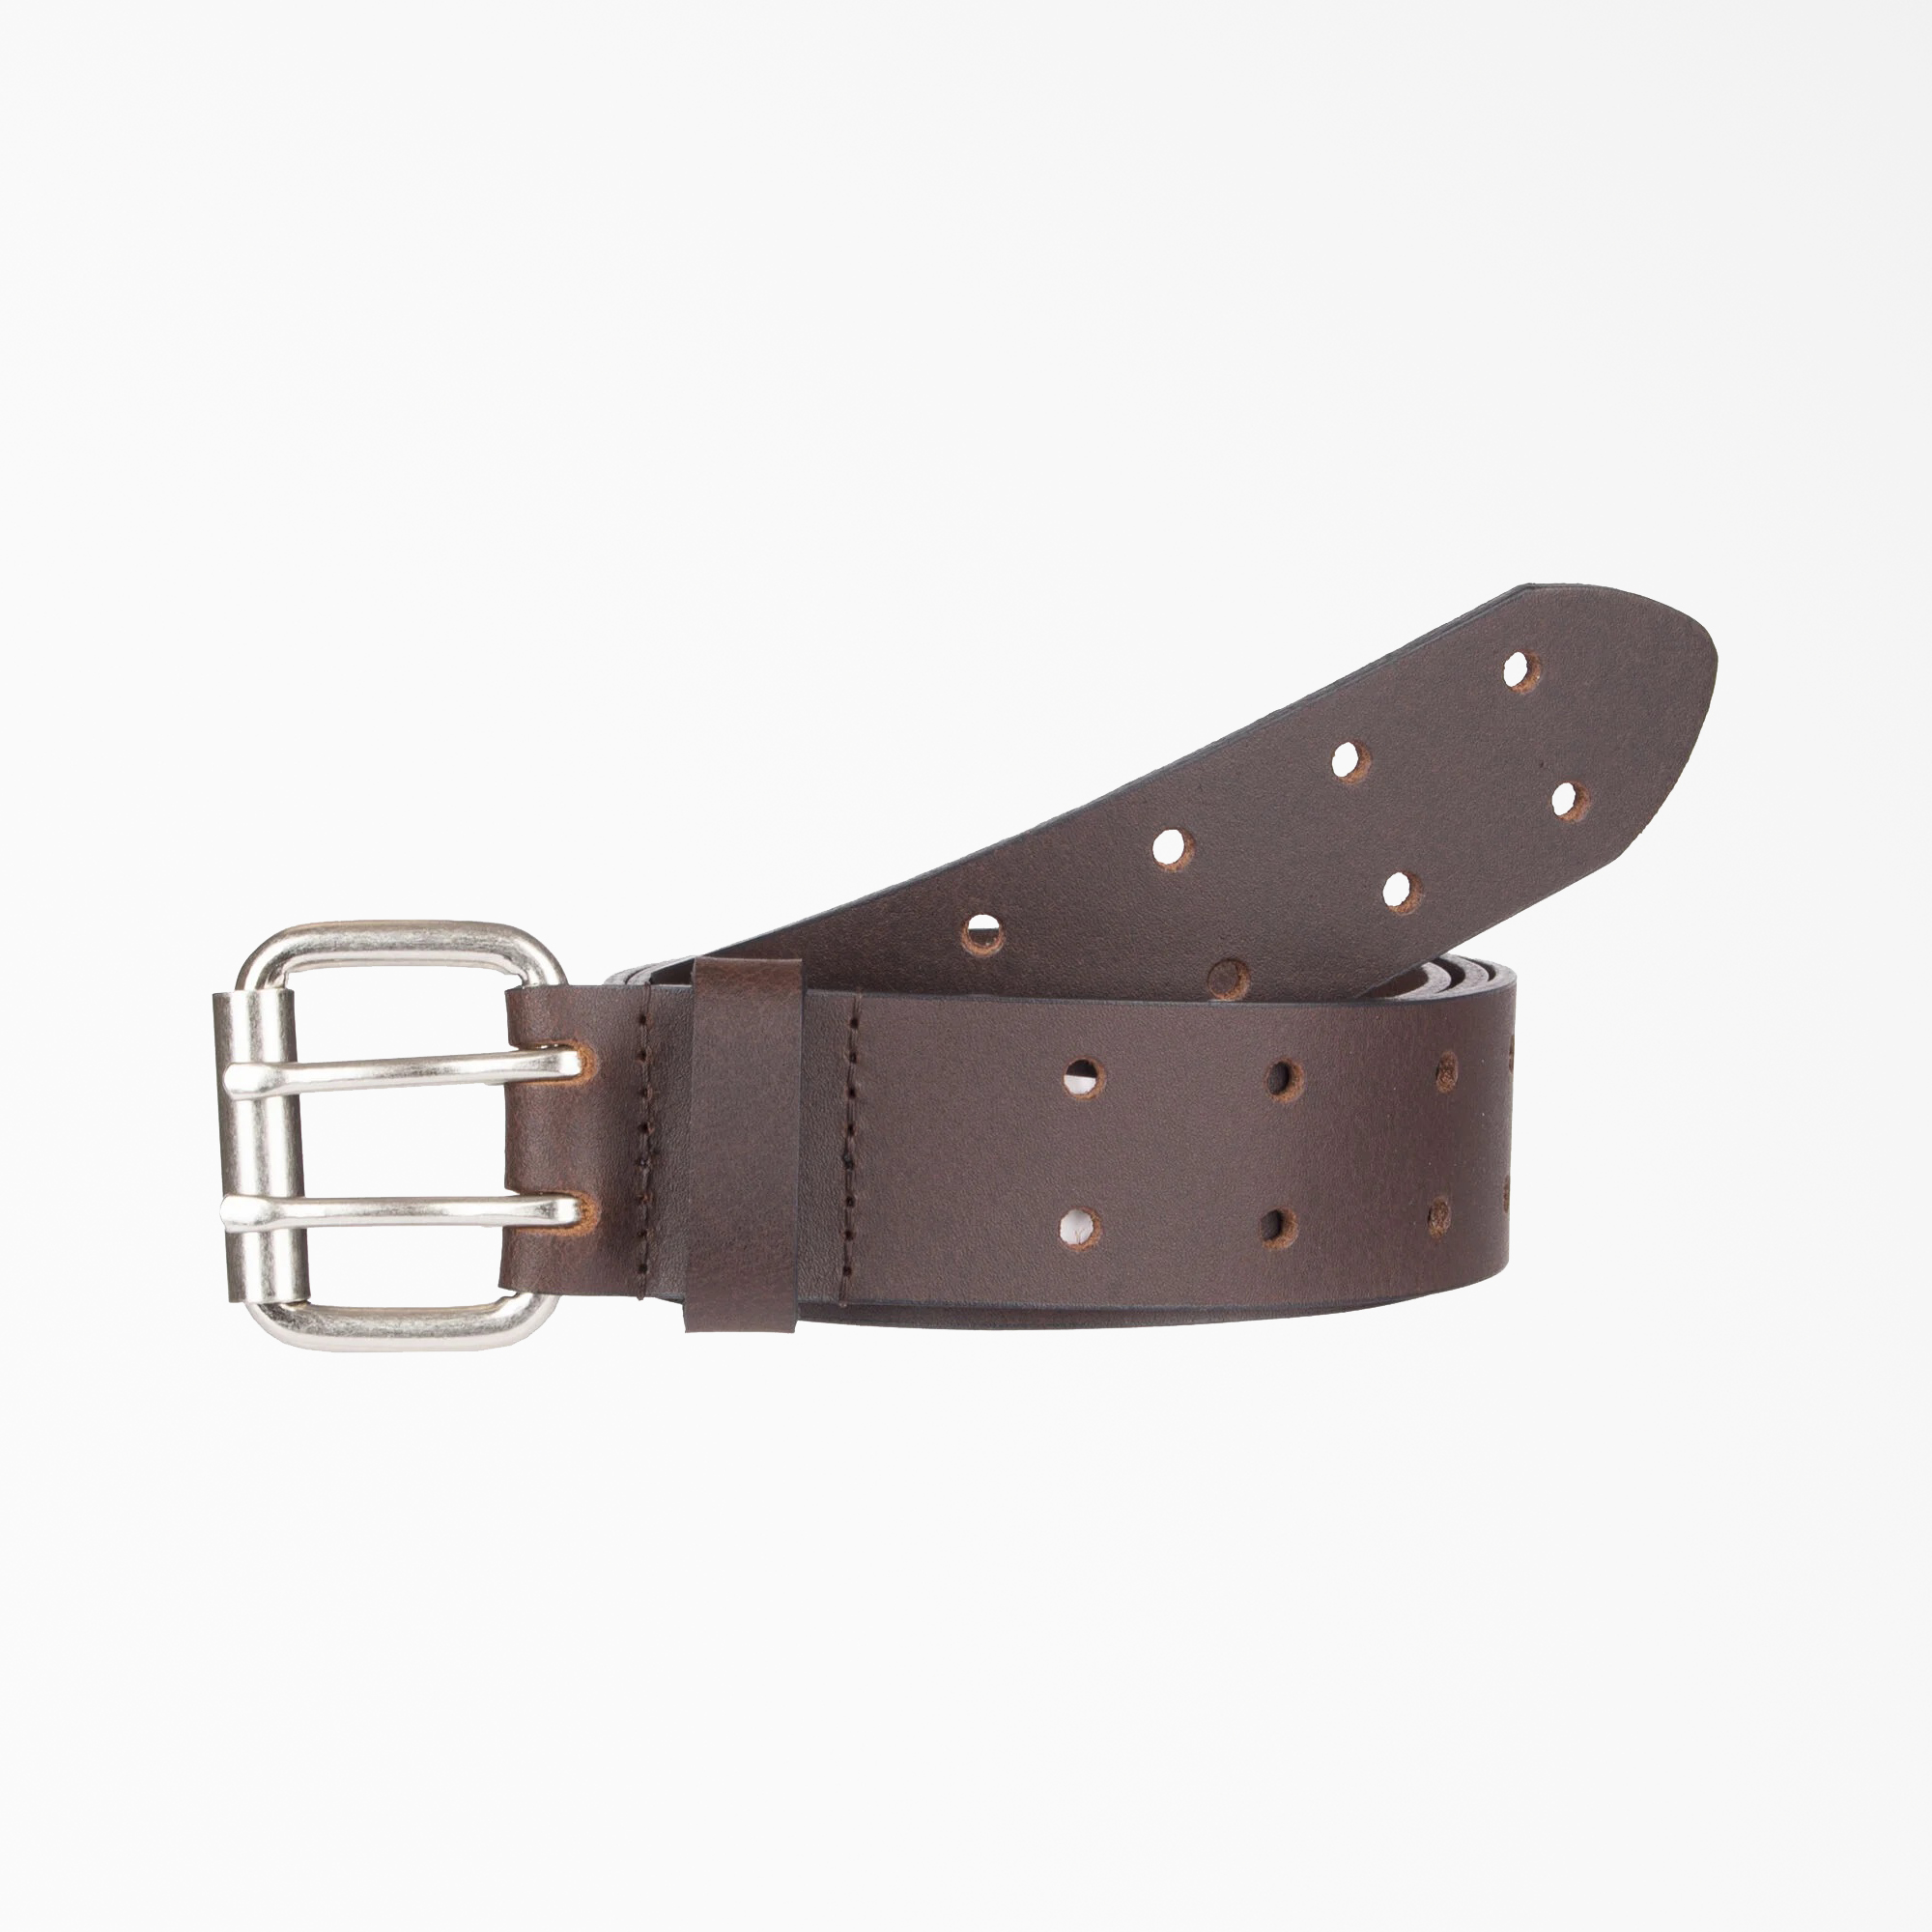 Big & Tall Leather Double Prong Belt - Tan (BR)